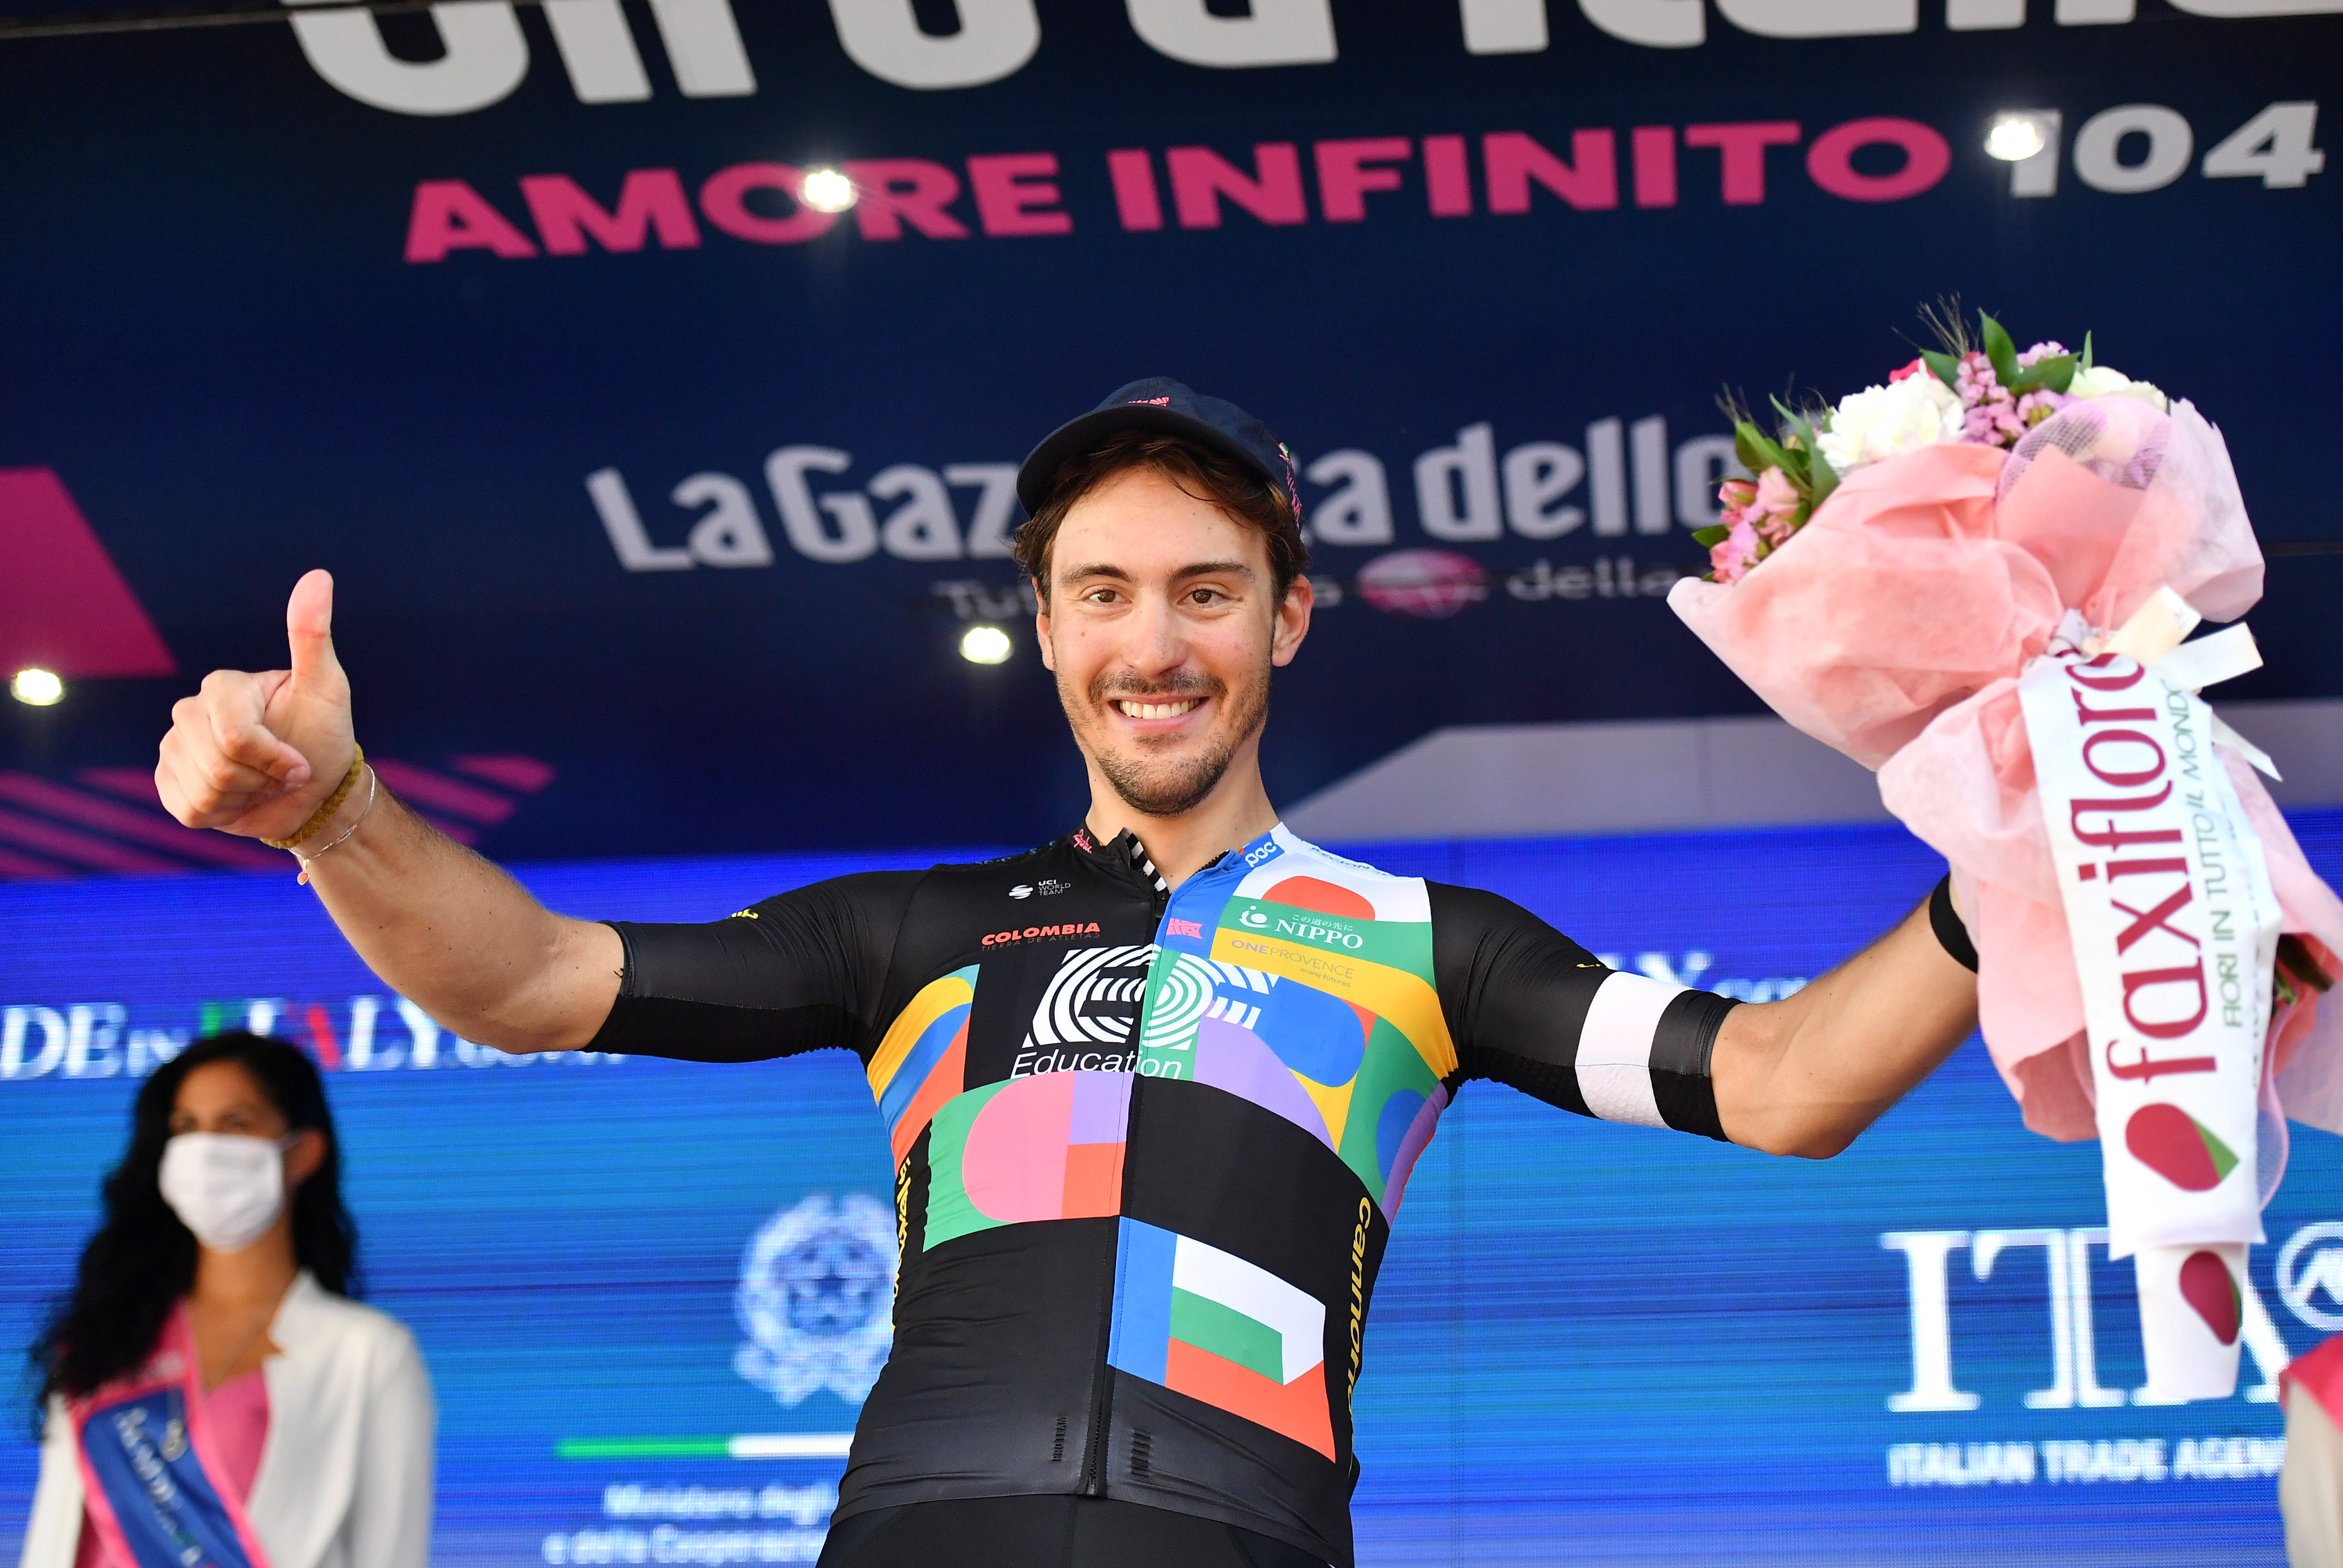 Bettiol rides to solo victory on longest Giro stage, Bernal retains